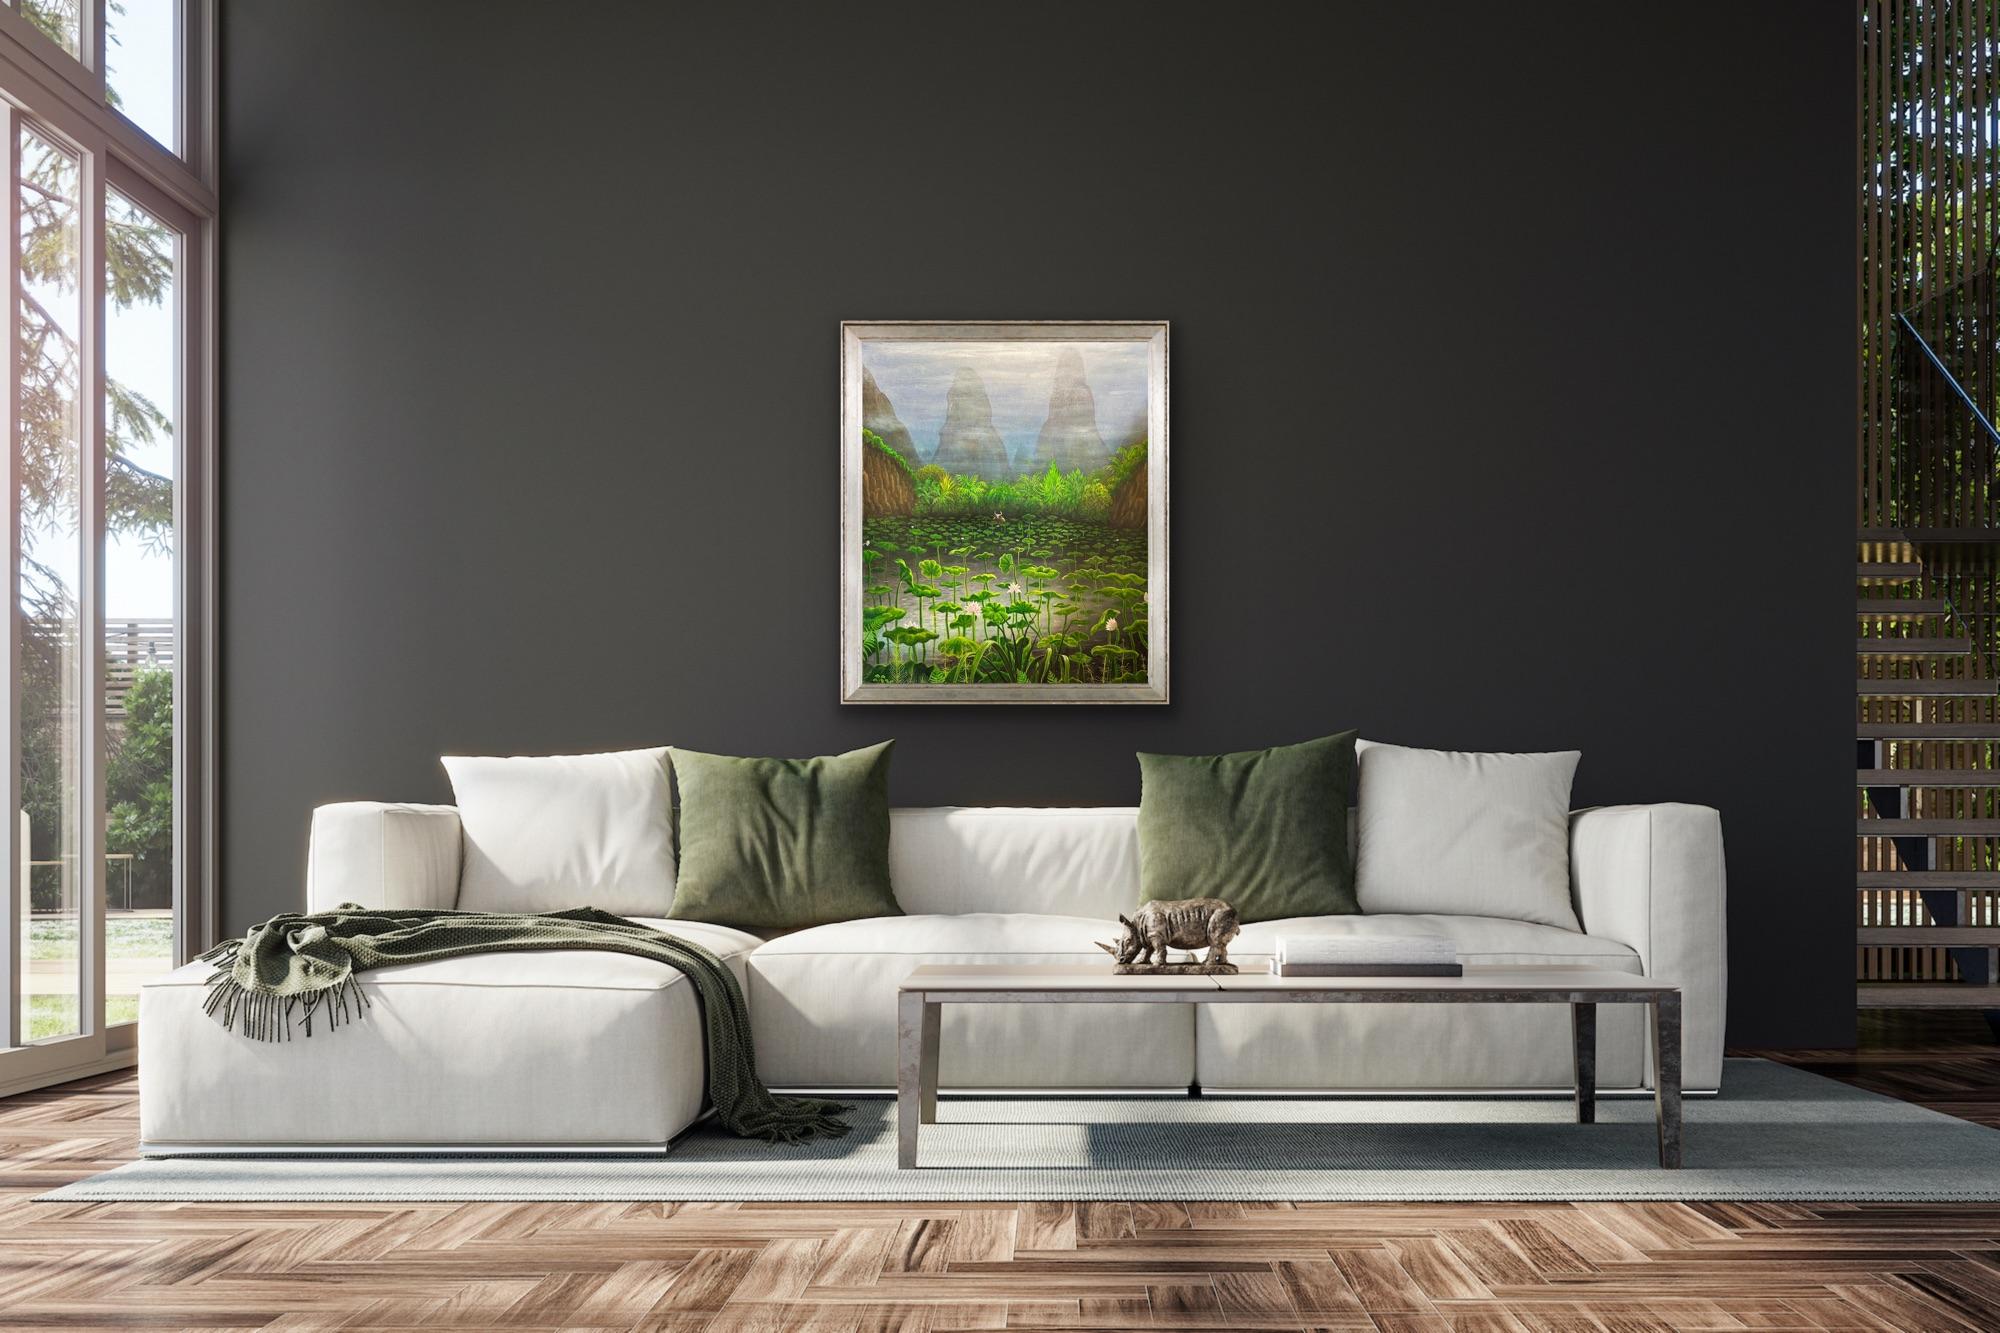 Lotus Lake, acrylic on canvas, 71cm x 61cm, 2022

Even in his most realistic images, there is a beautiful exaggeration in the paintings of Peter Rodulfo. It may be an overly flamboyant palette or a carefully chosen viewpoint but nothing is everyday